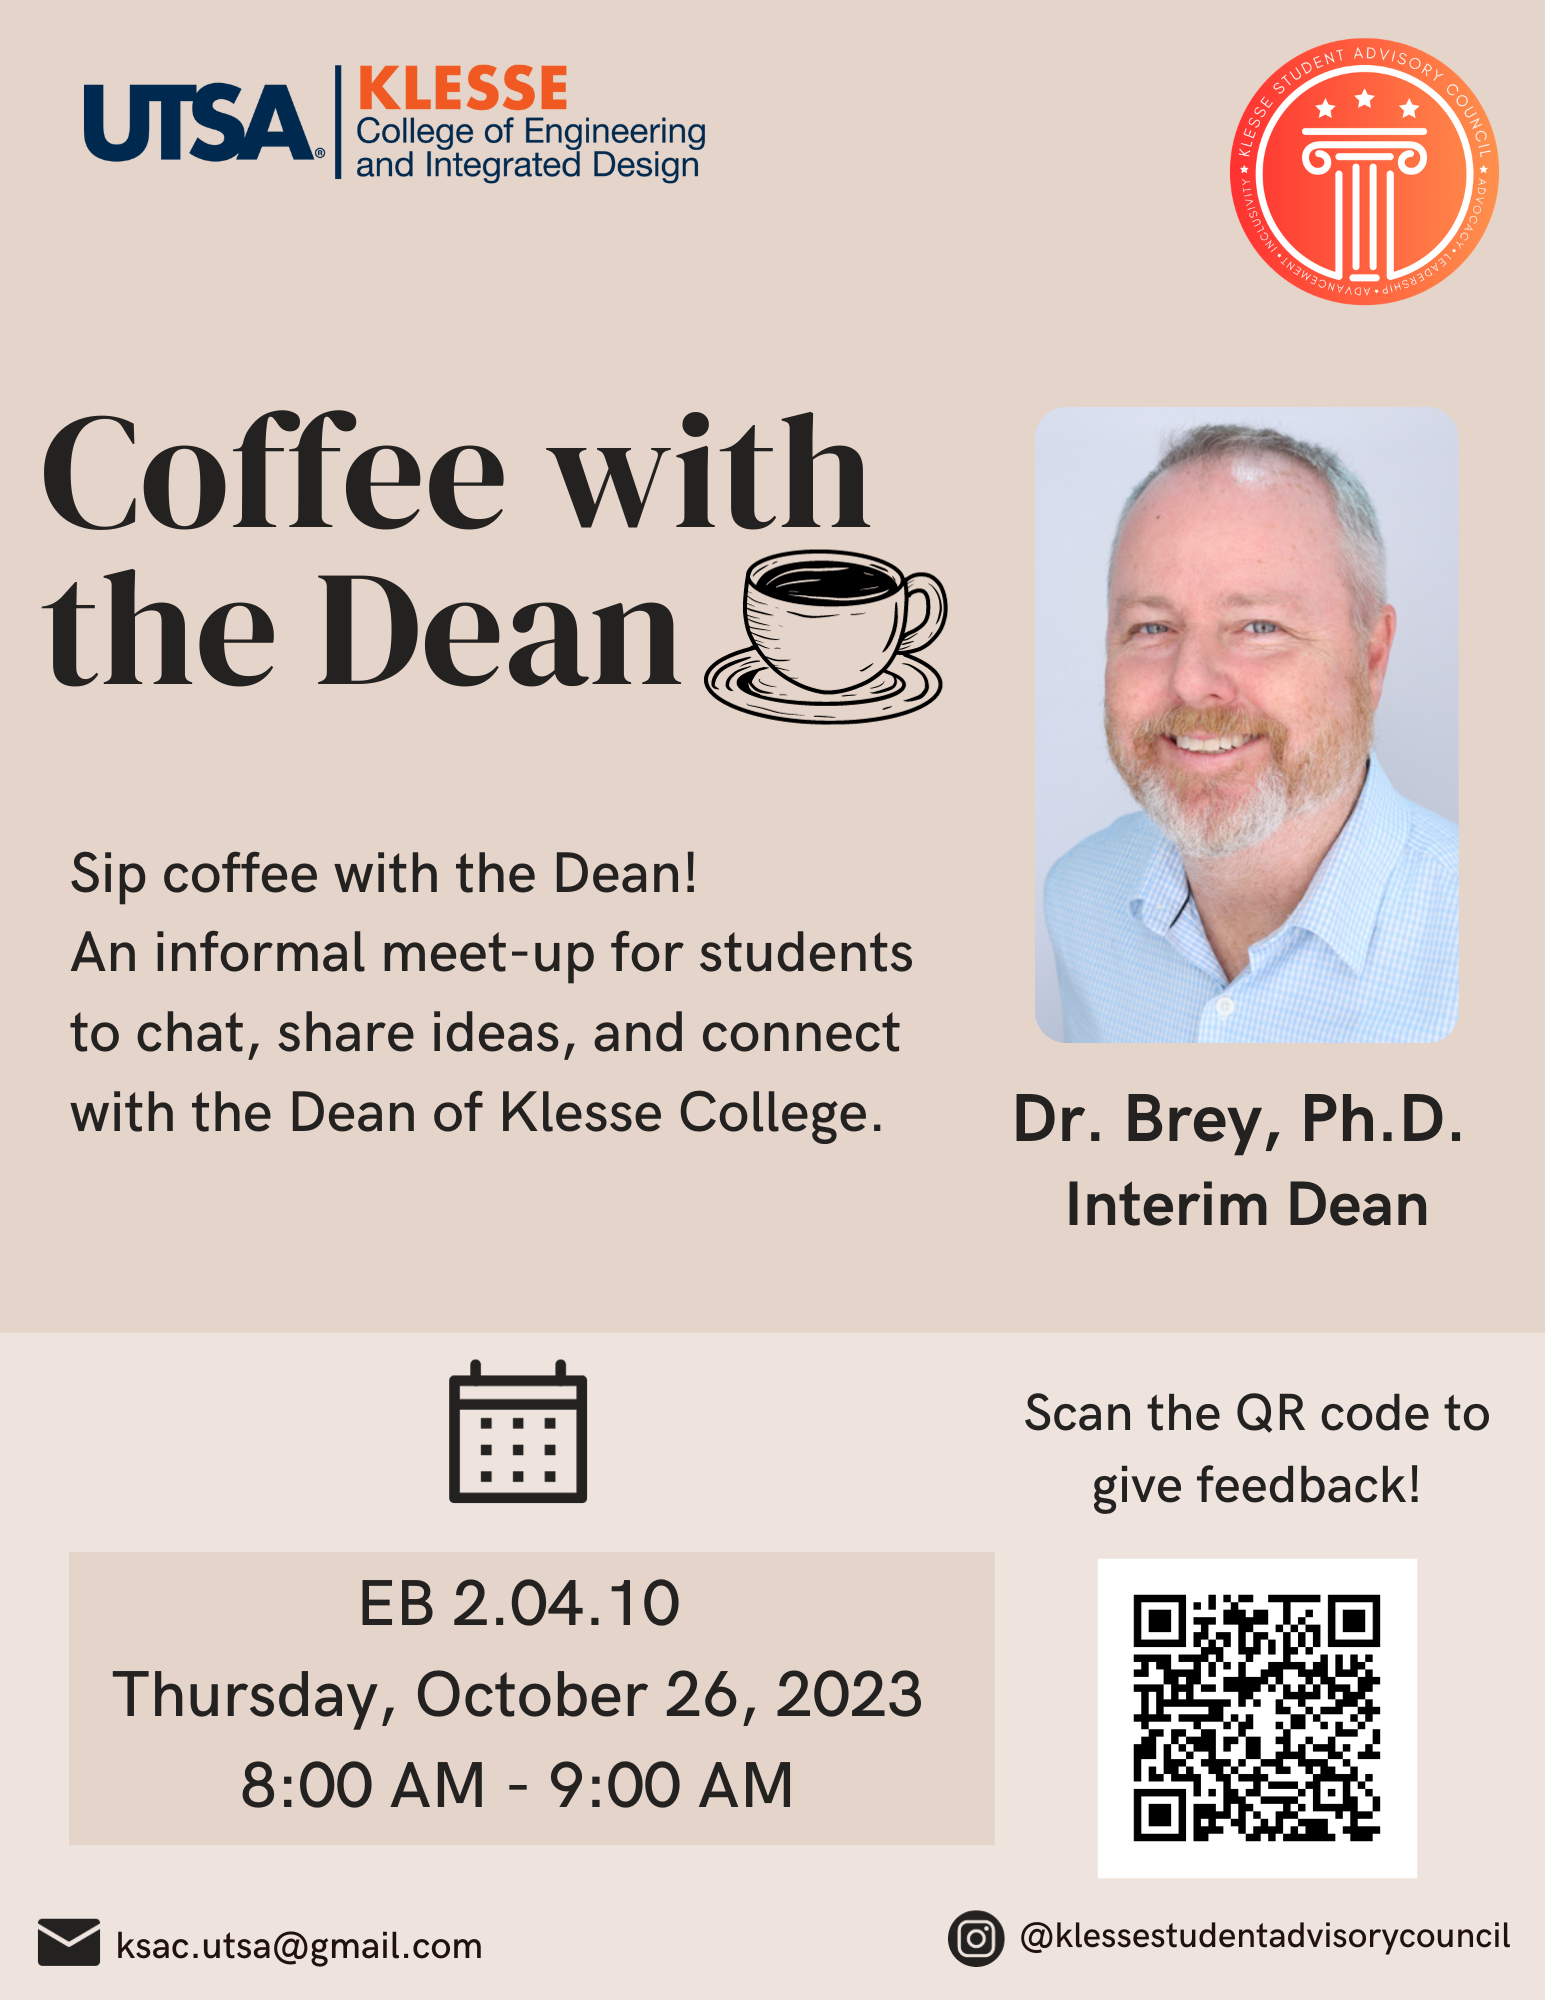 Coffee with the Dean Event Flyer